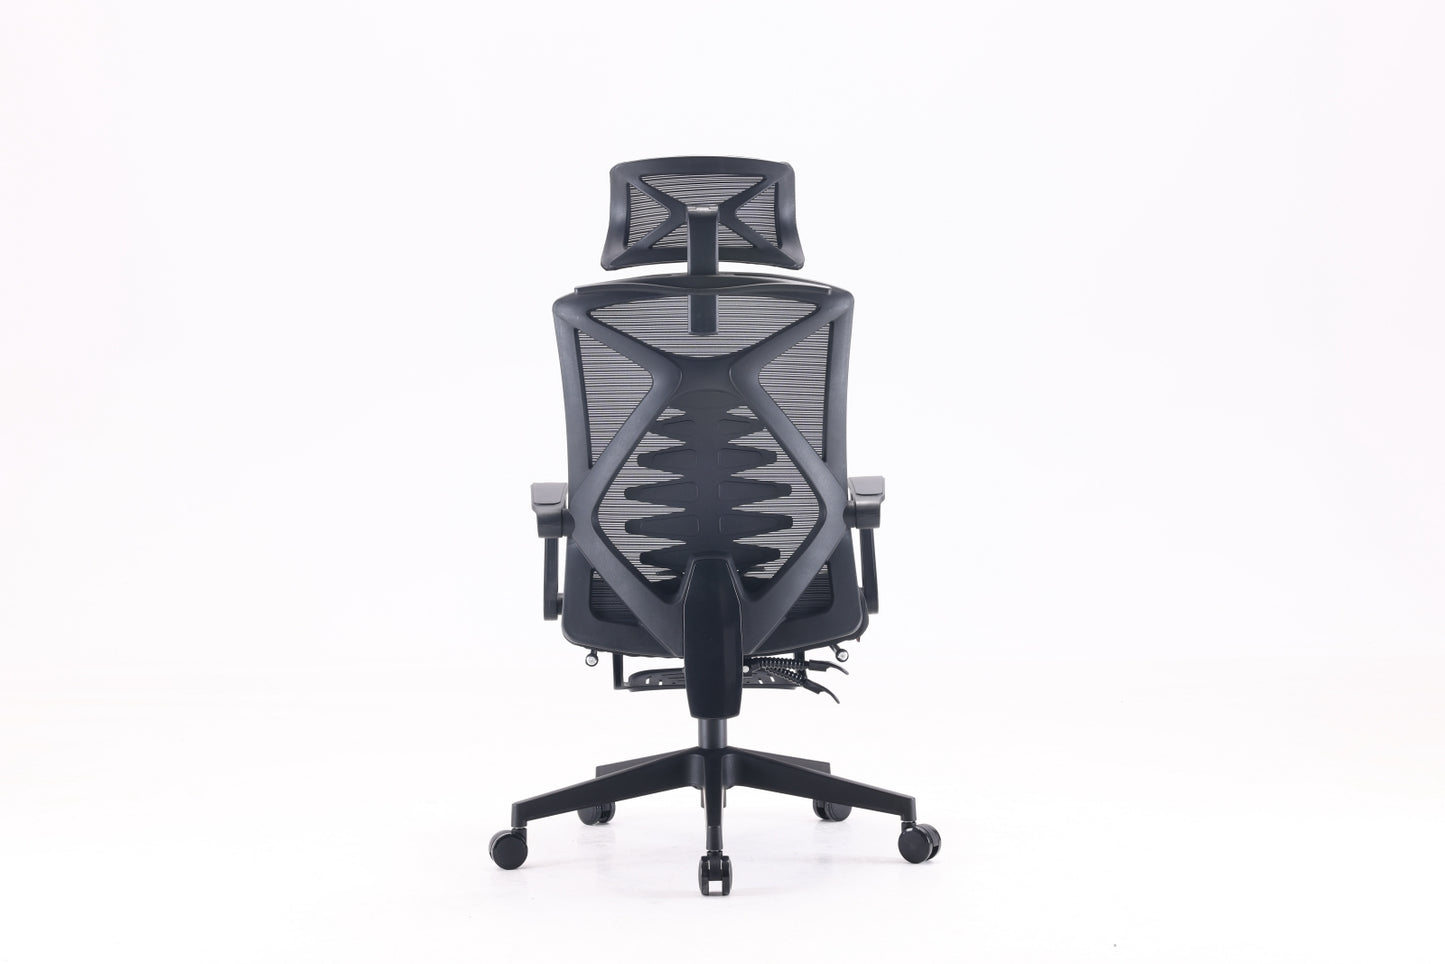 Sihoo M92B Ergonomic Chair (with built-in footrest)